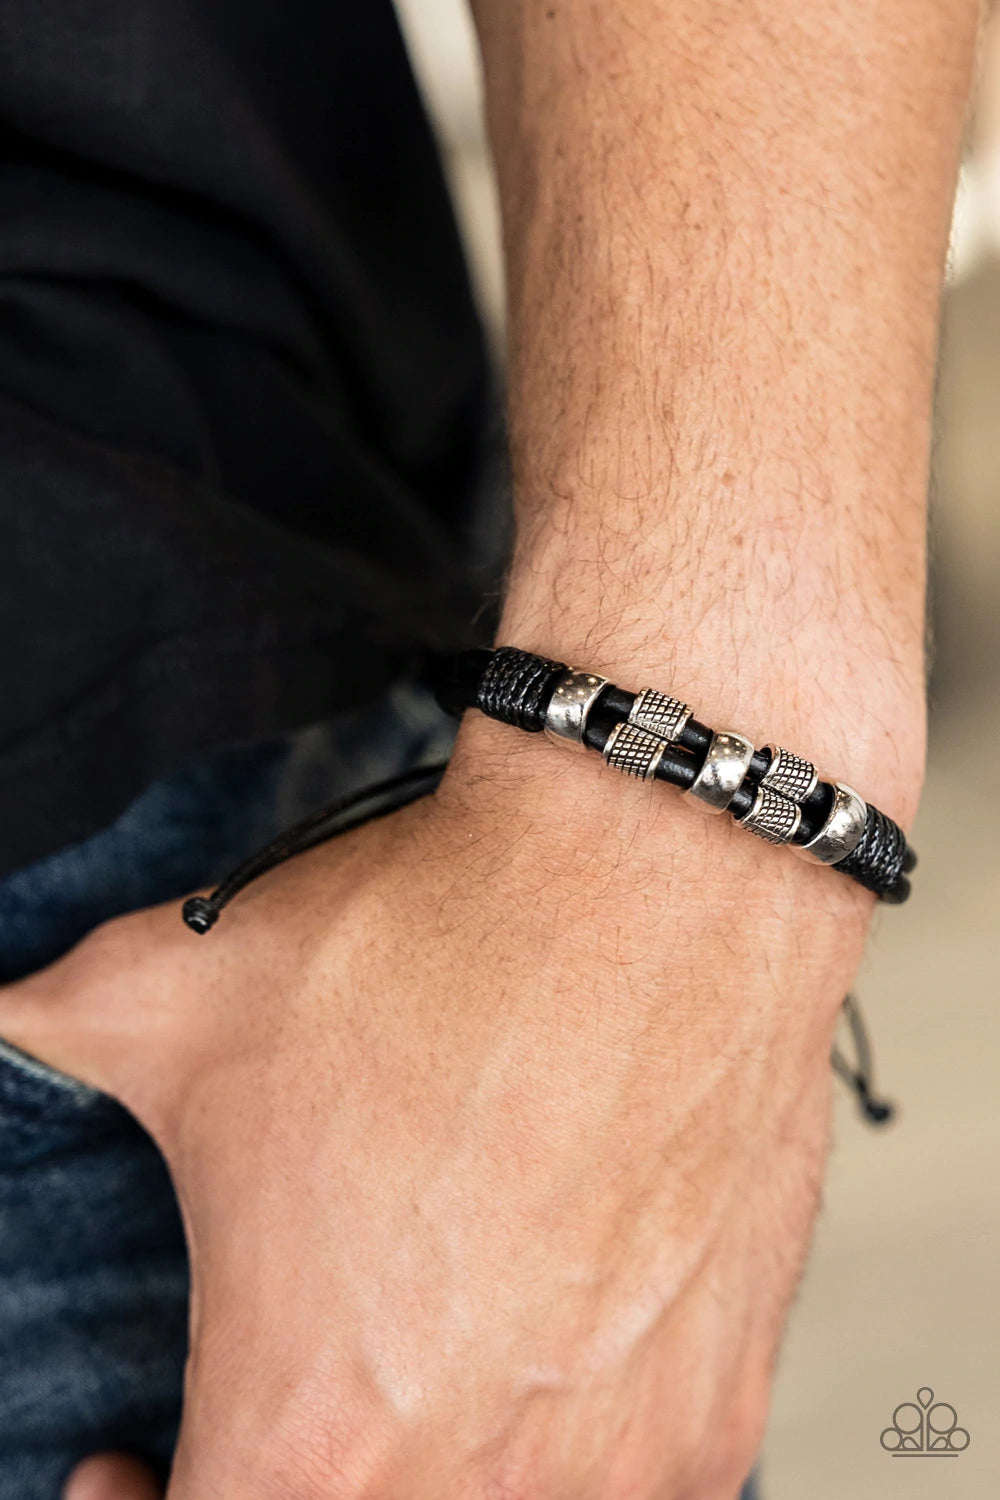 Paparazzi Accessories Urban Cattle Drive - Black Shiny and textured silver cylindrical accents slide along a double layer of thick black leather cording. Glossy thread wrangles the ends together creating a rustic finish as it wraps around the wrist. Featu